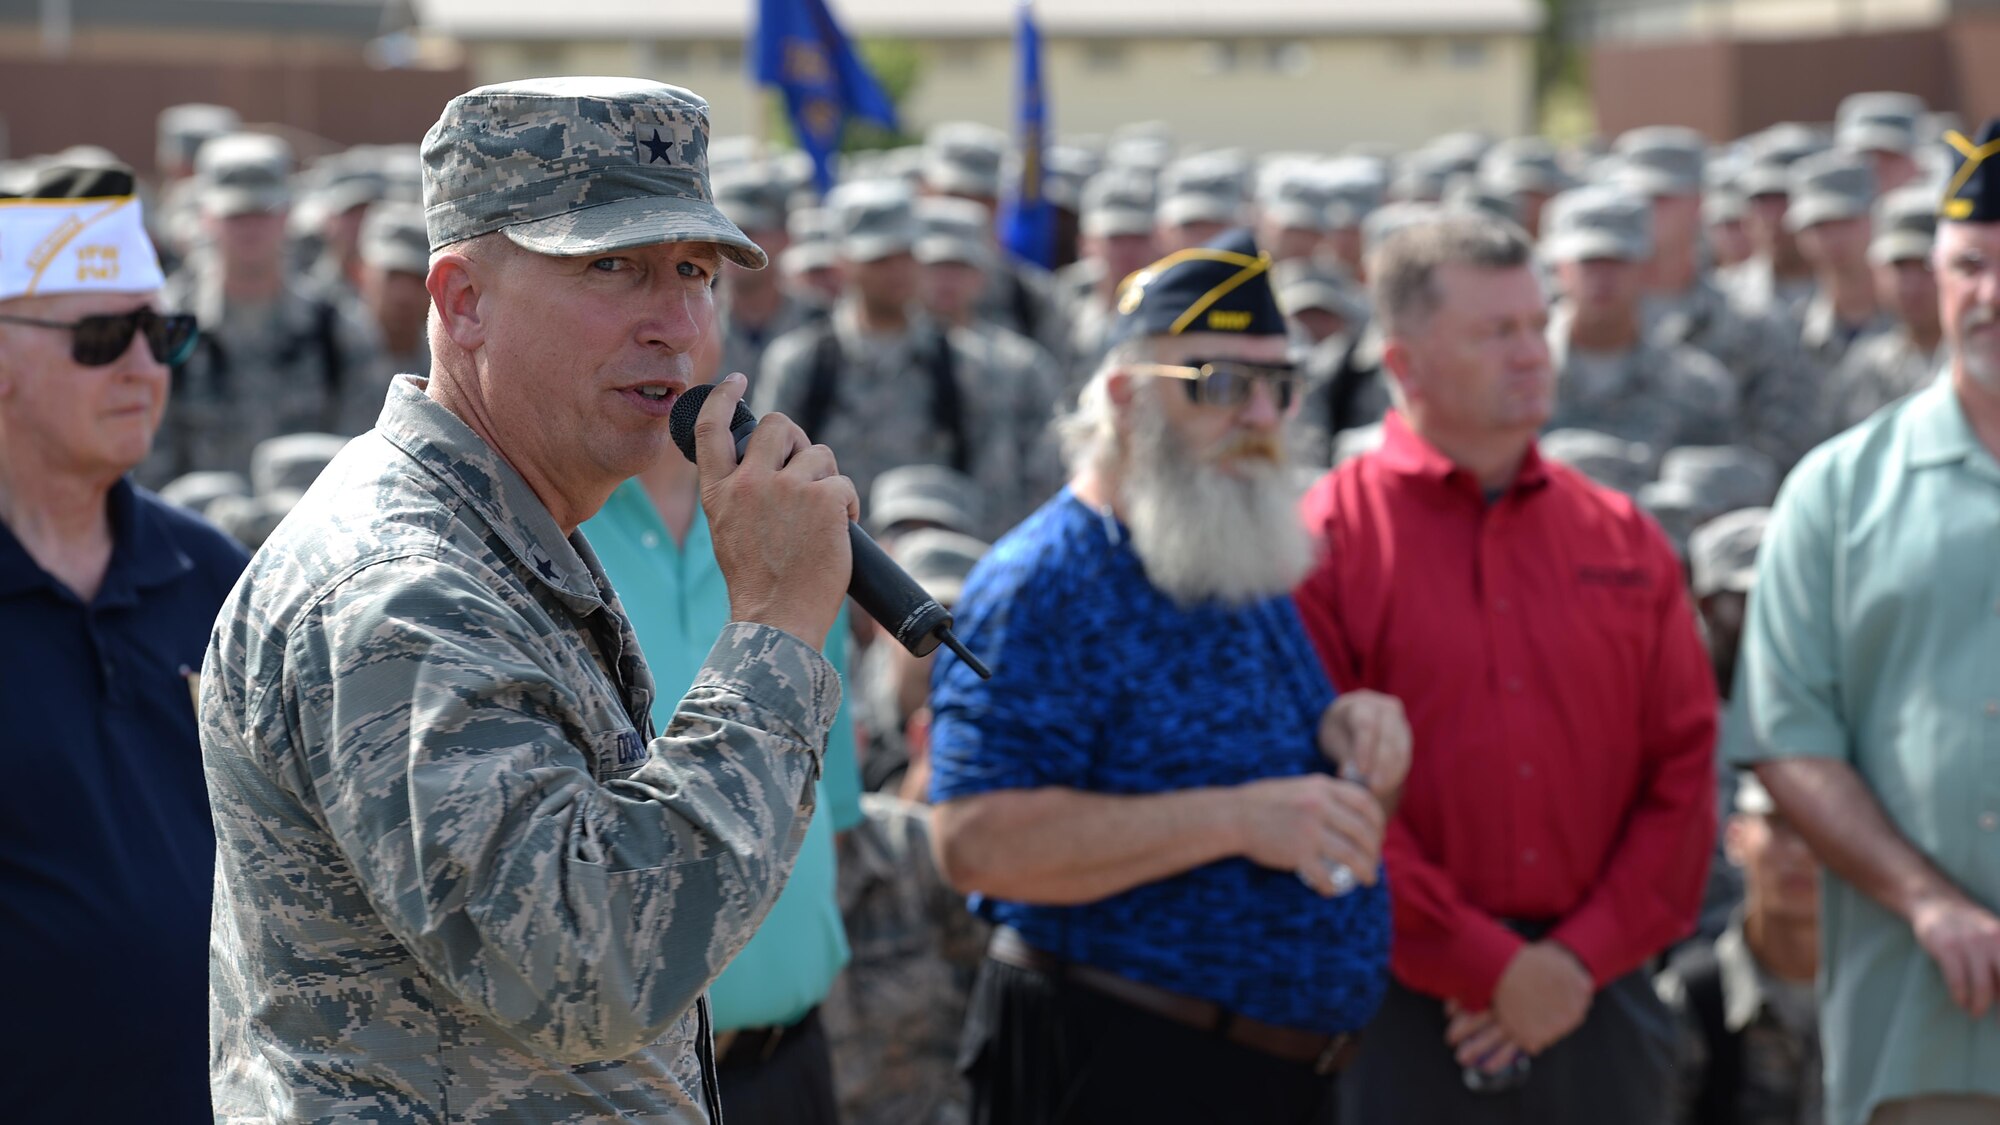 Brig. Gen. Patrick Doherty, 82nd Training Wing commander, talks to everyone who attended the POW MIA parade at Sheppard Air Force Base, Texas, about the significance of military service and an extended thank you to the veterans who previously served, Sept. 9, 2016. More than 83,000 Americans remain missing from WWII, the Korean War, the Cold War, the Gulf Wars and other conflicts. Of those missing, 41,000 of the missing are presumed lost at sea. (U.S. Air Force photo by Senior Airman Kyle E. Gese)